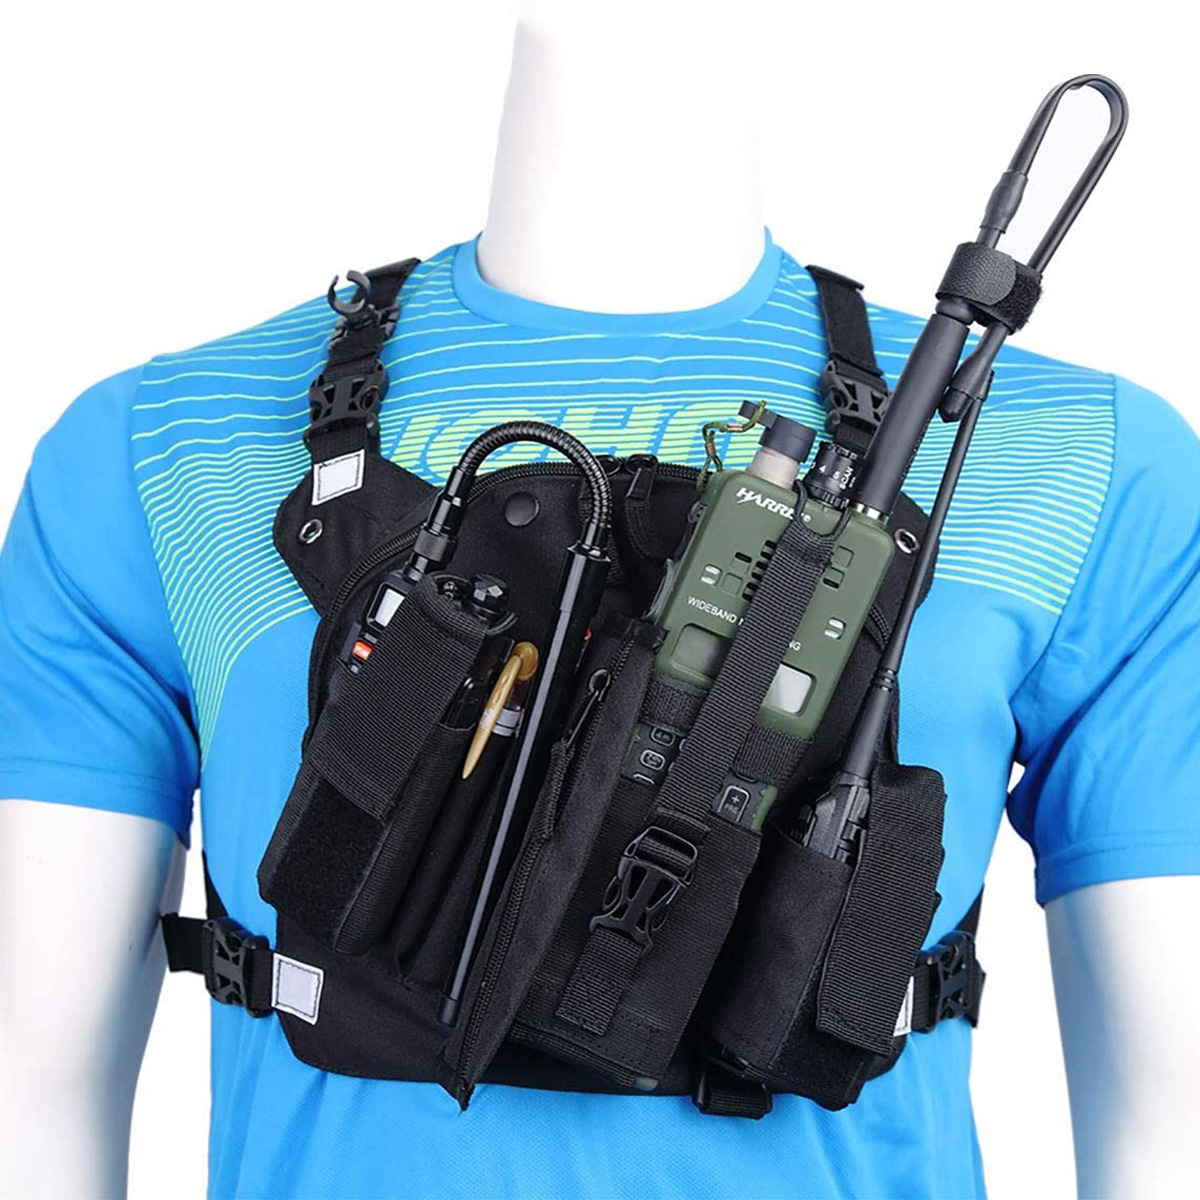 ABBREE-Walkie-Talkie-Tactical-Storage-Chest-Bag-Portable-Shoulder-Straps-Harness-Backpack-for-UV-5R--1893024-1